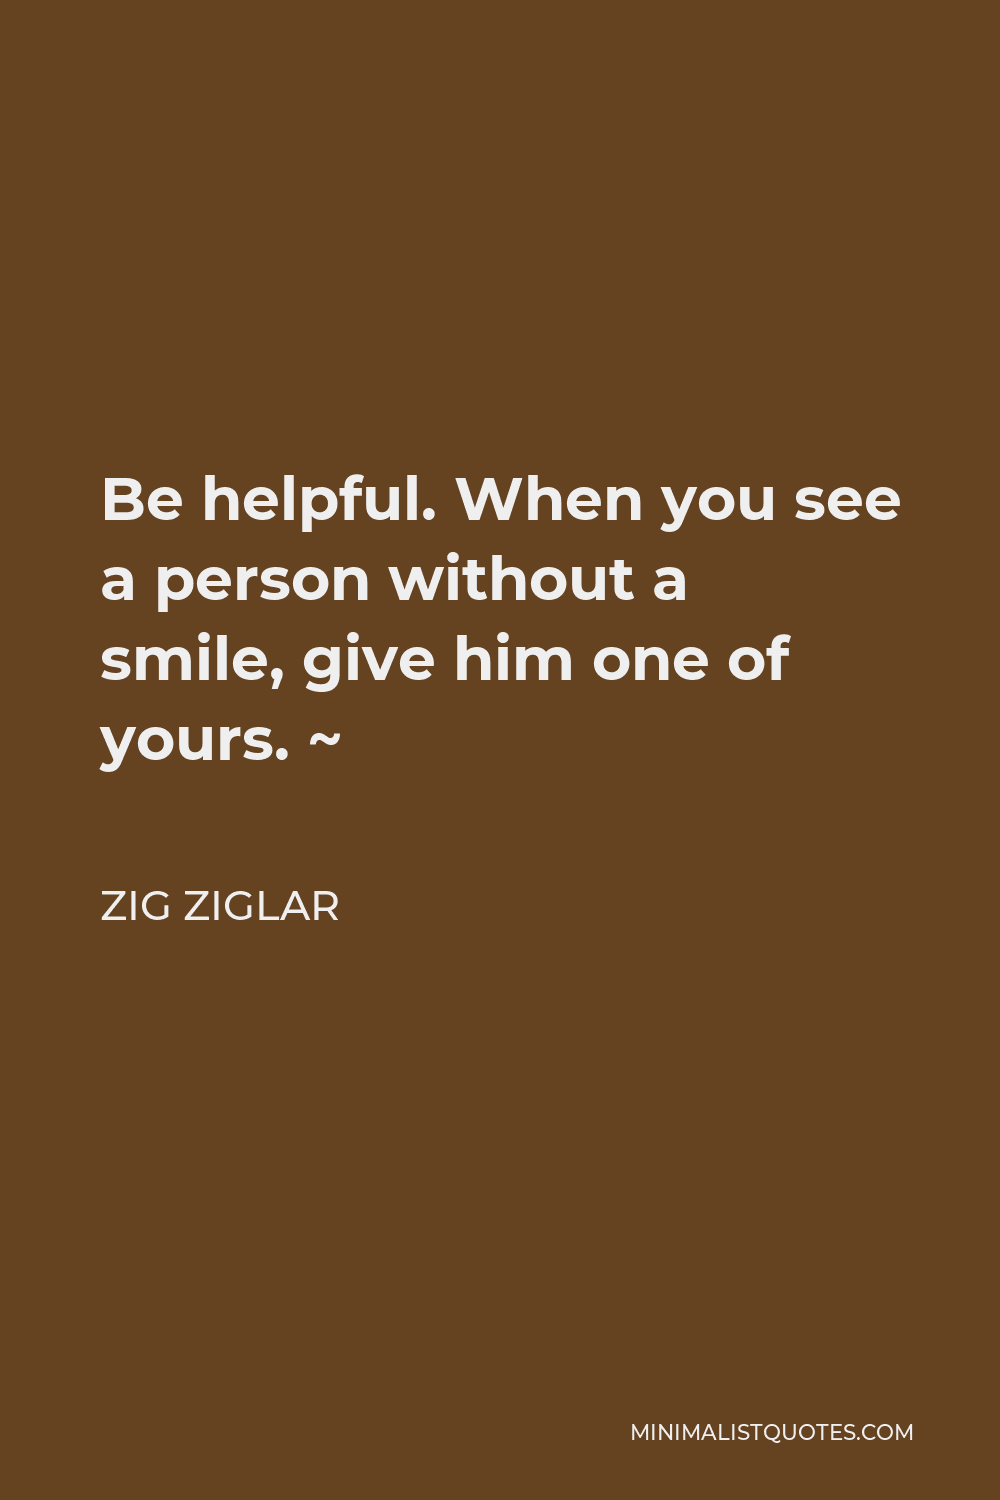 Zig Ziglar Quote - Be helpful. When you see a person without a smile, give him one of yours. ~